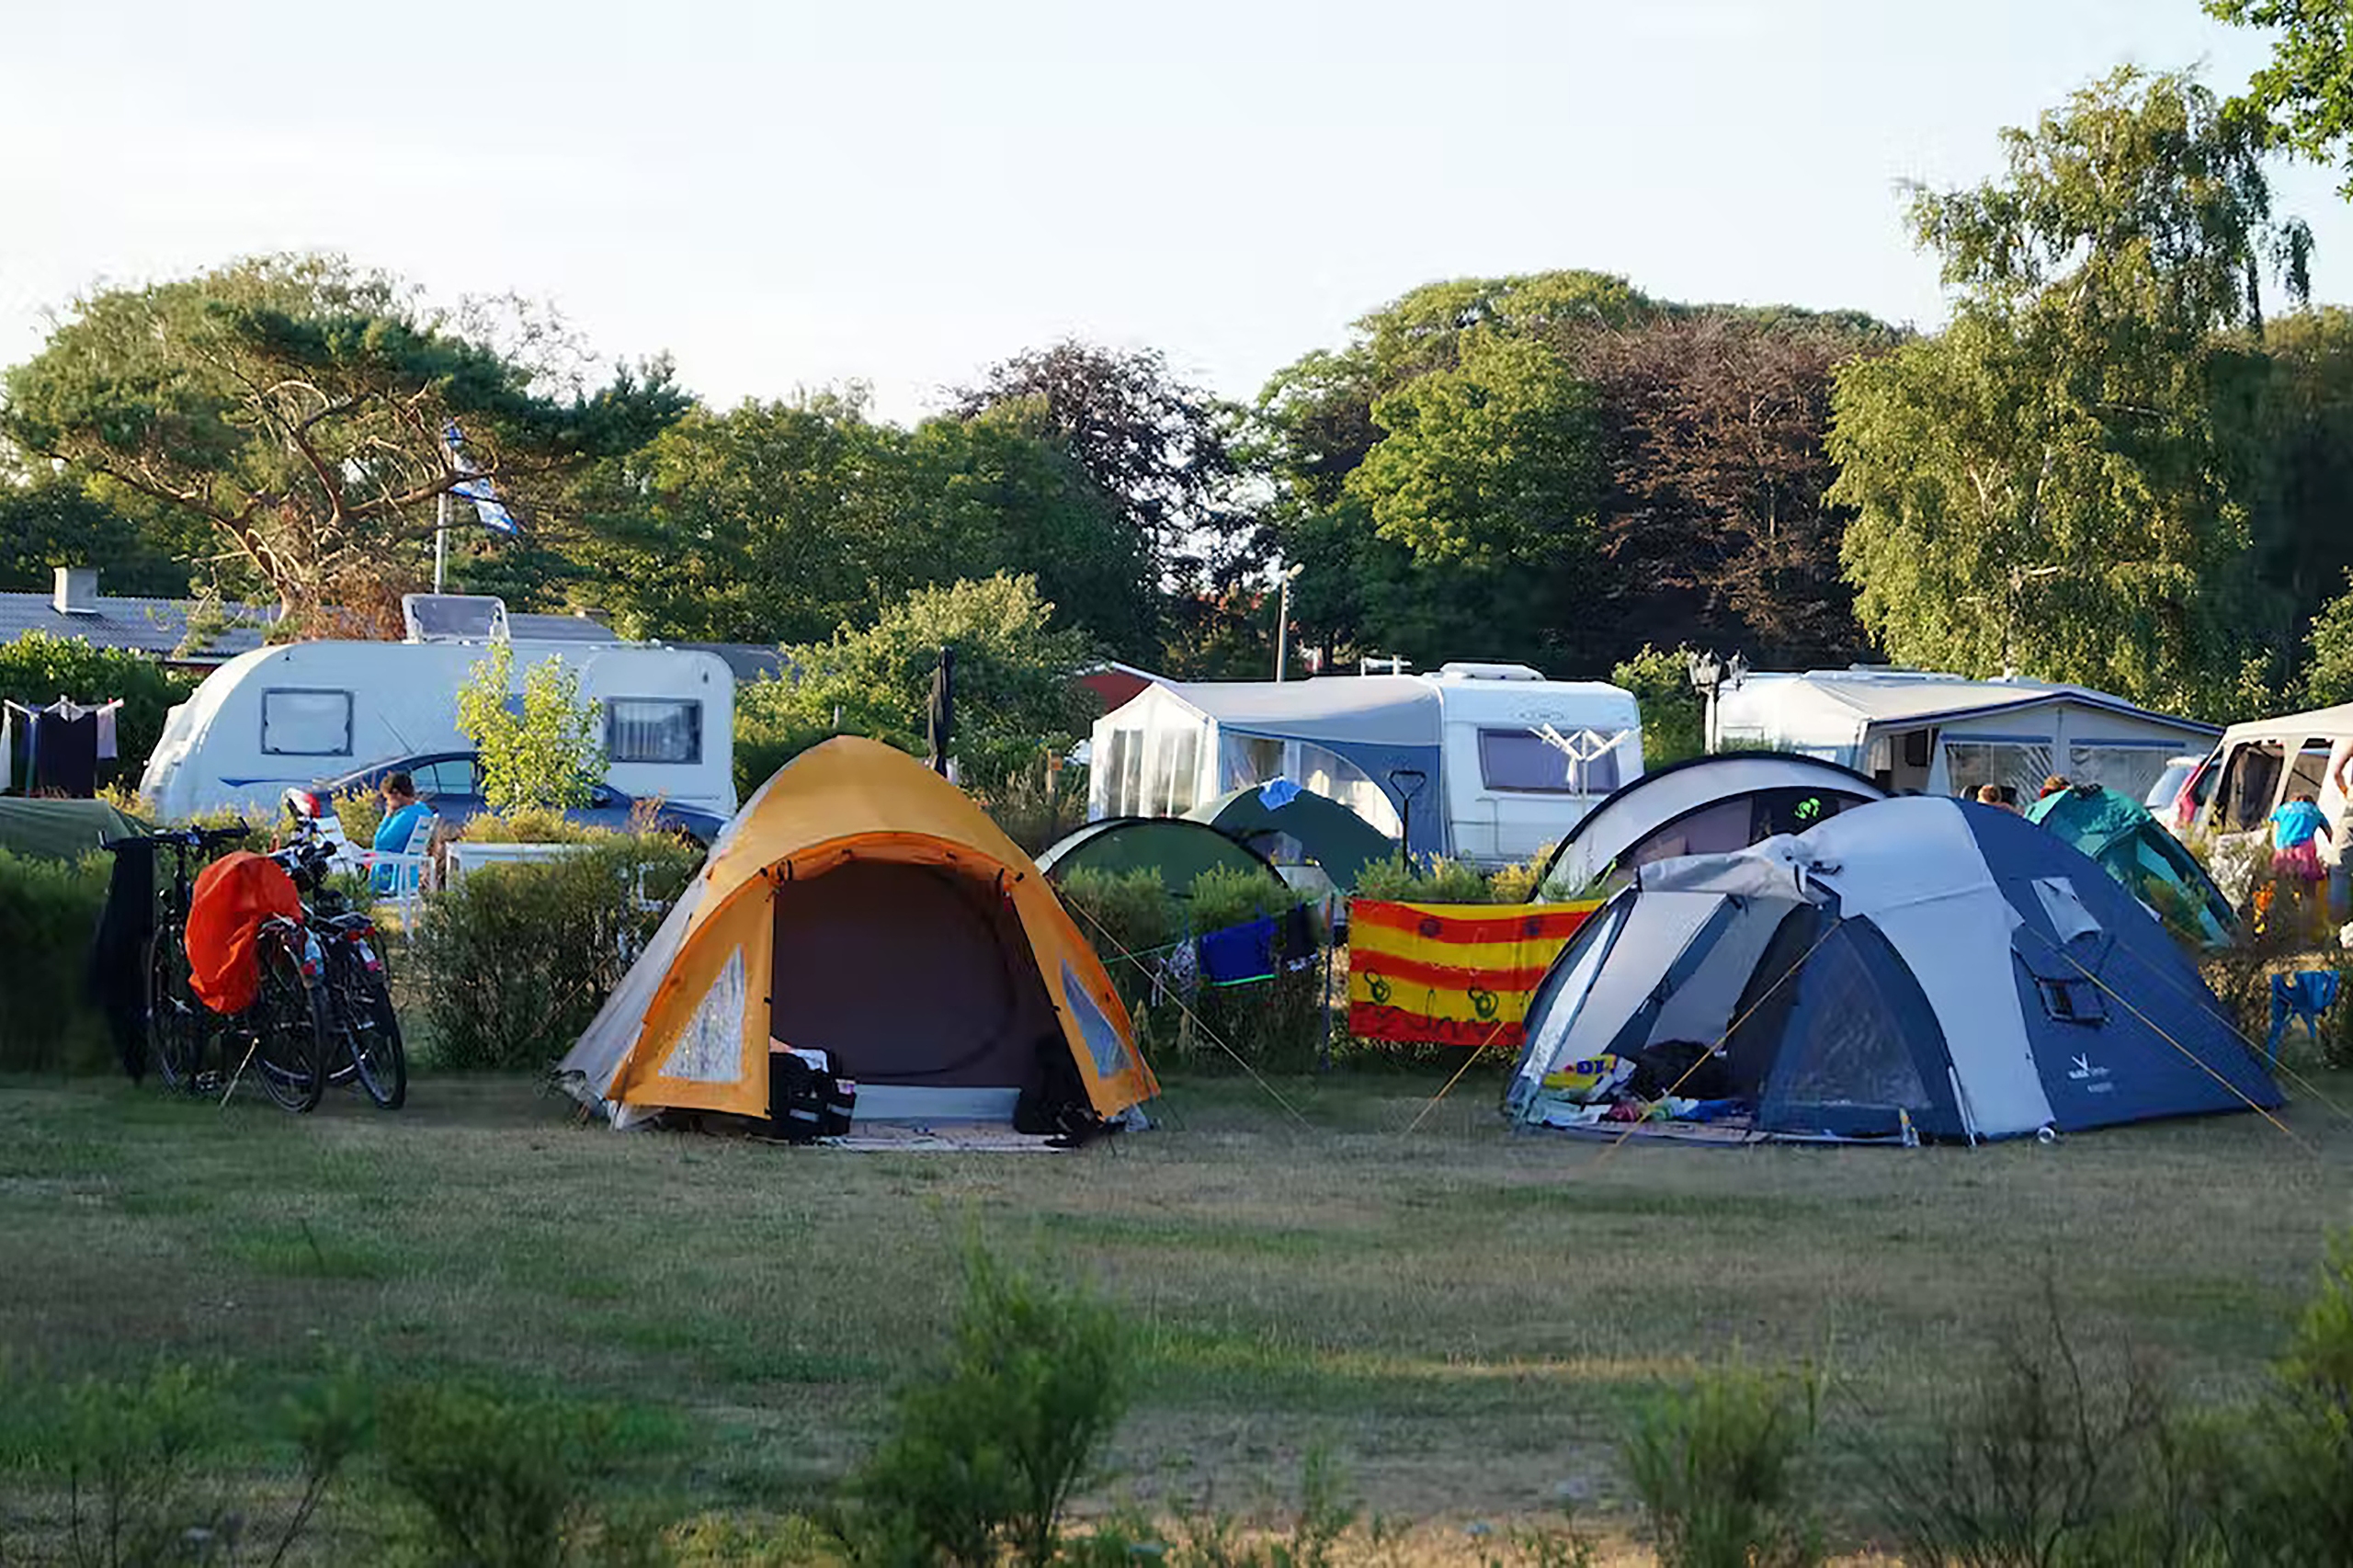 This campsite on Bornholm, Hasle Camping, is within walking distance of the historic Hasle fish smokehouse.